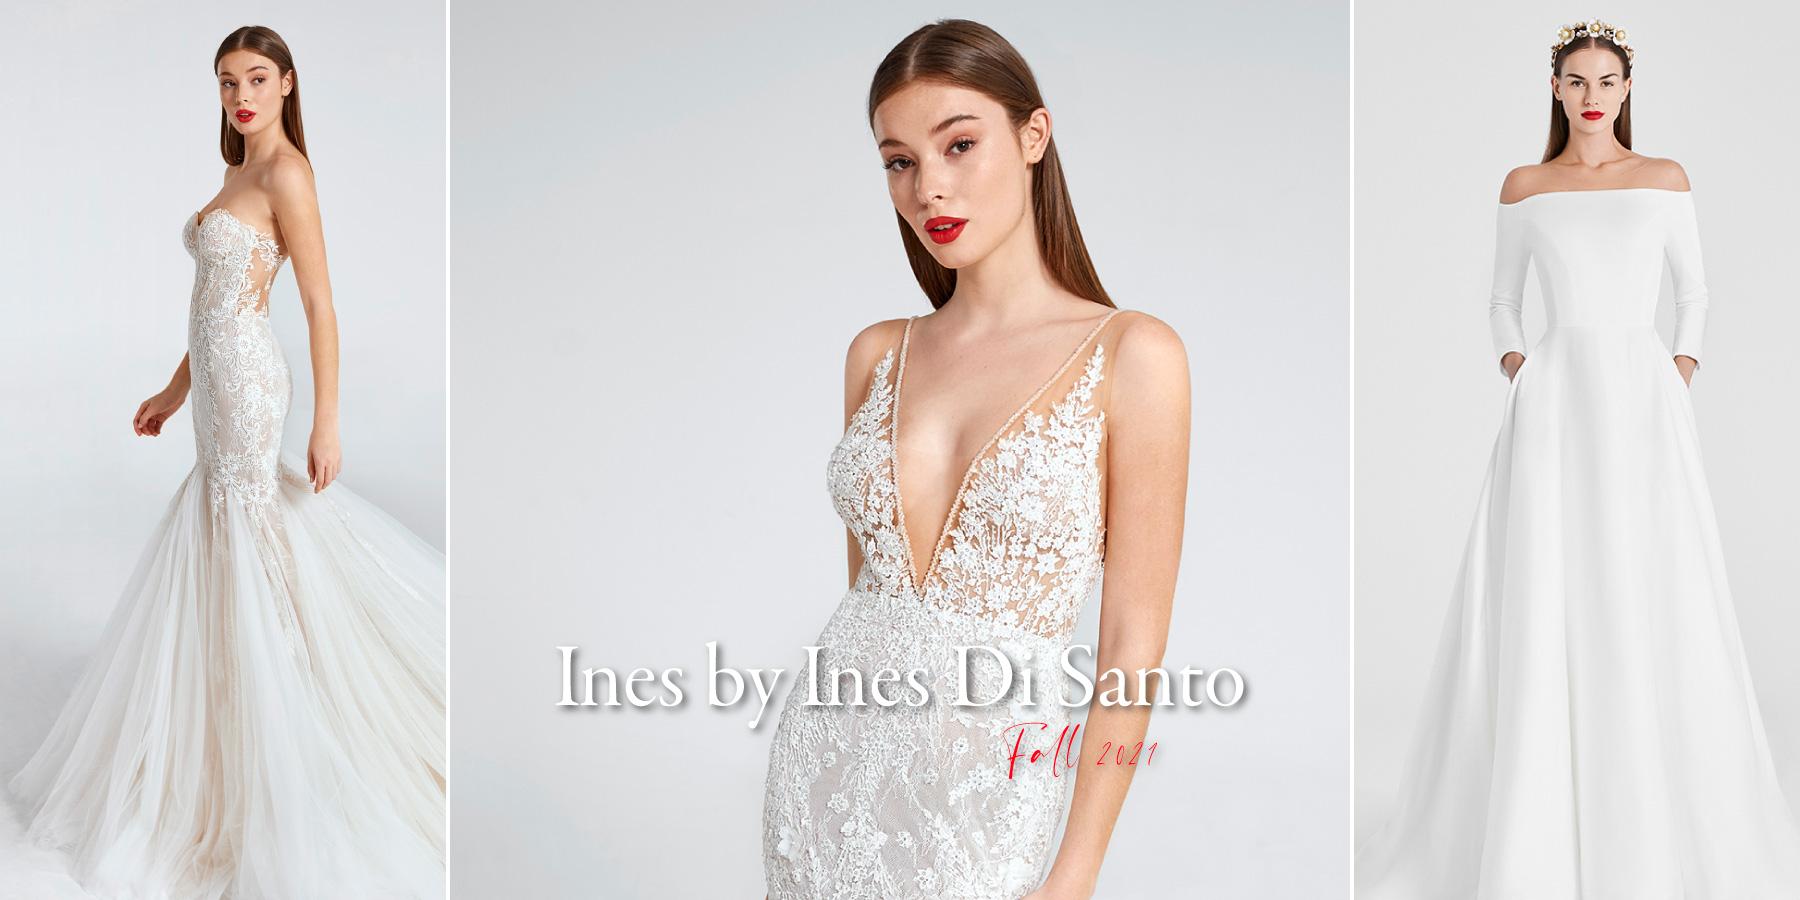 Wedding Dresses to Buy & Sell From Vancouver, Canada